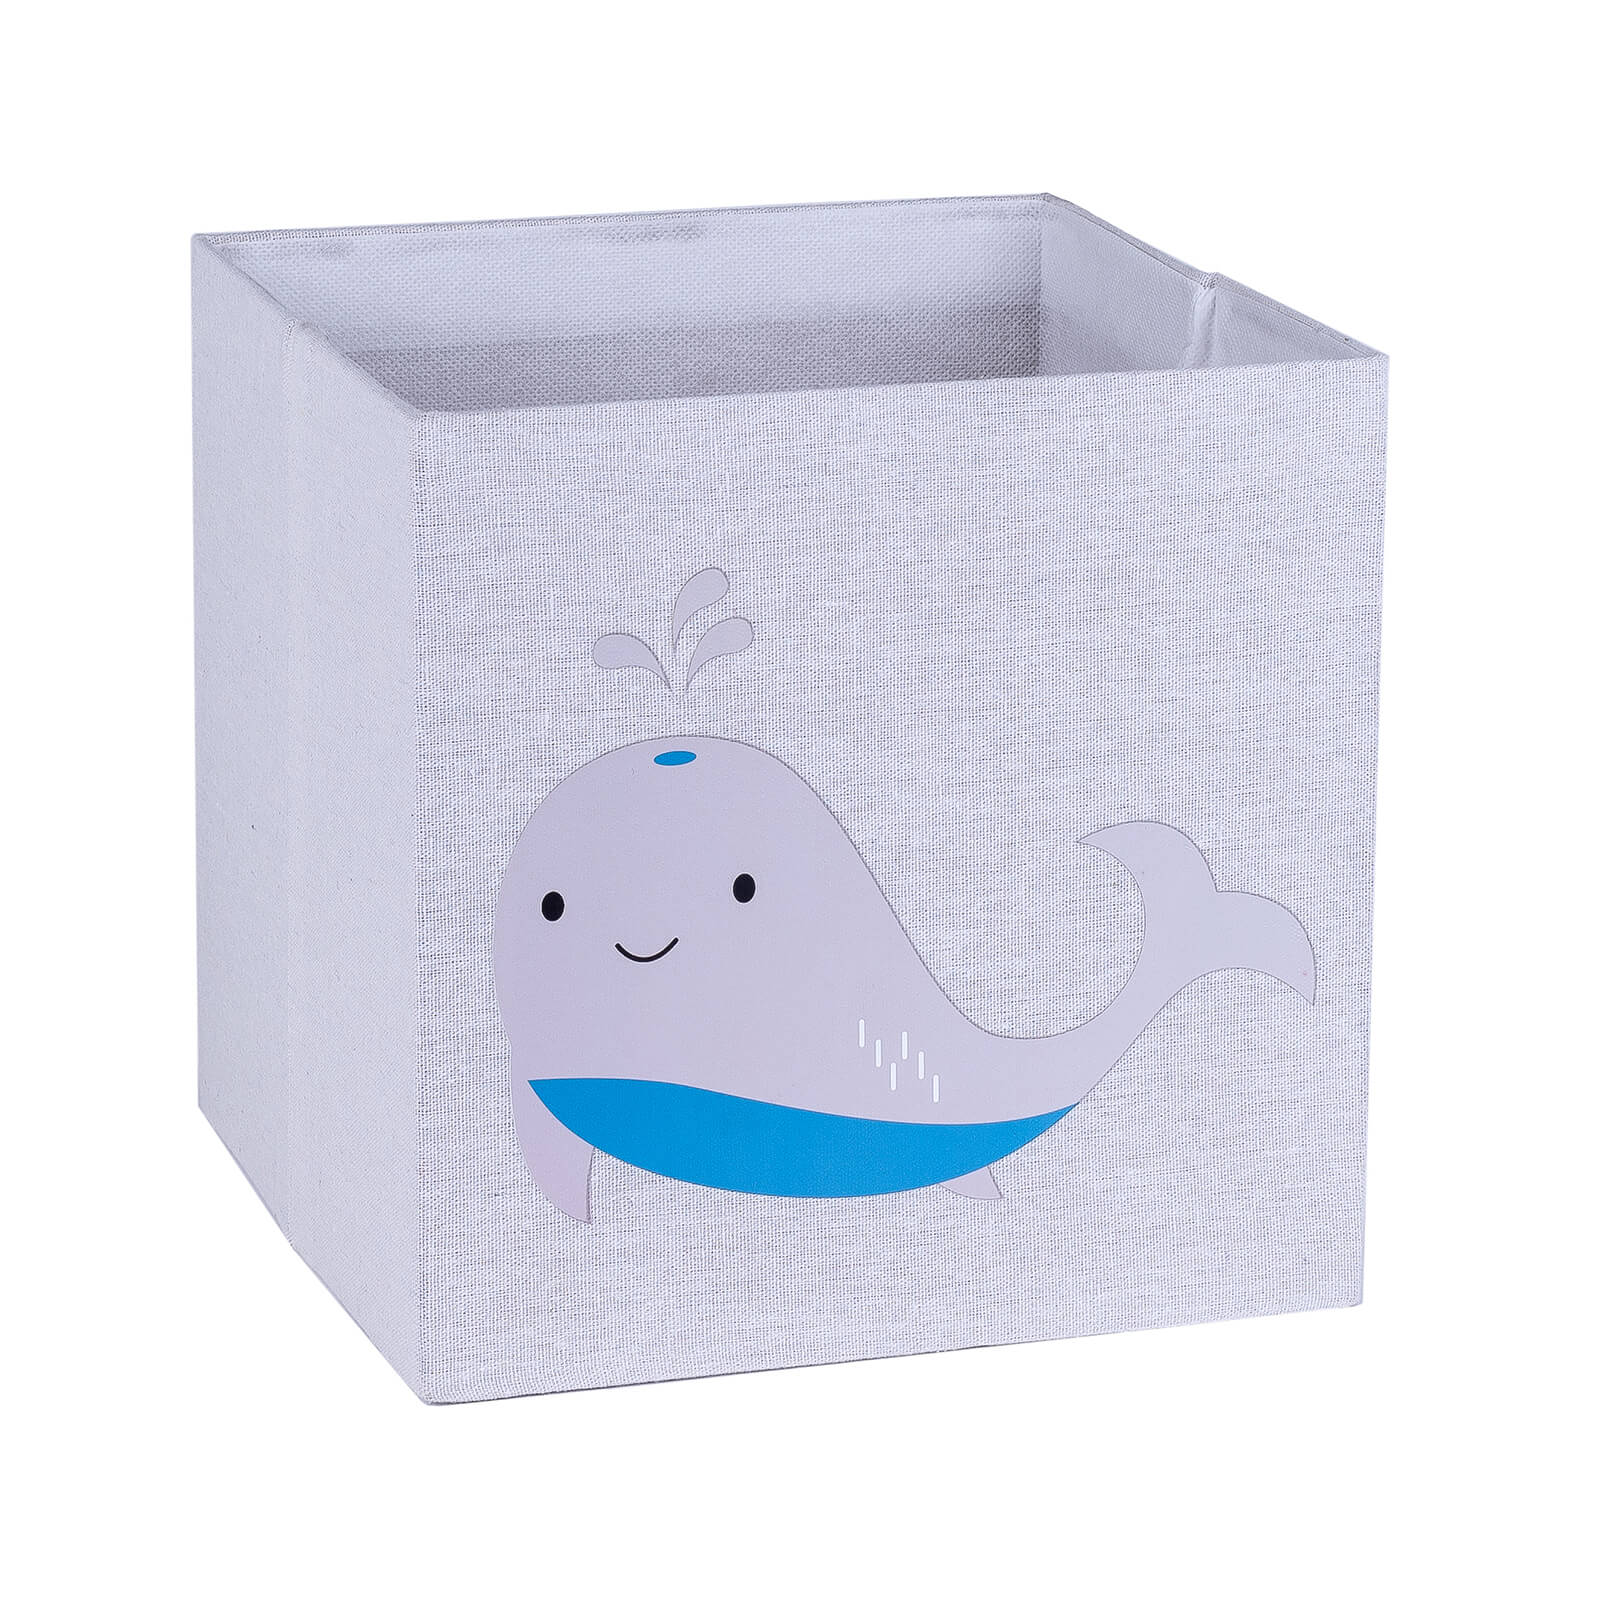 Kids' Compact Cube Fabric Insert - Whale